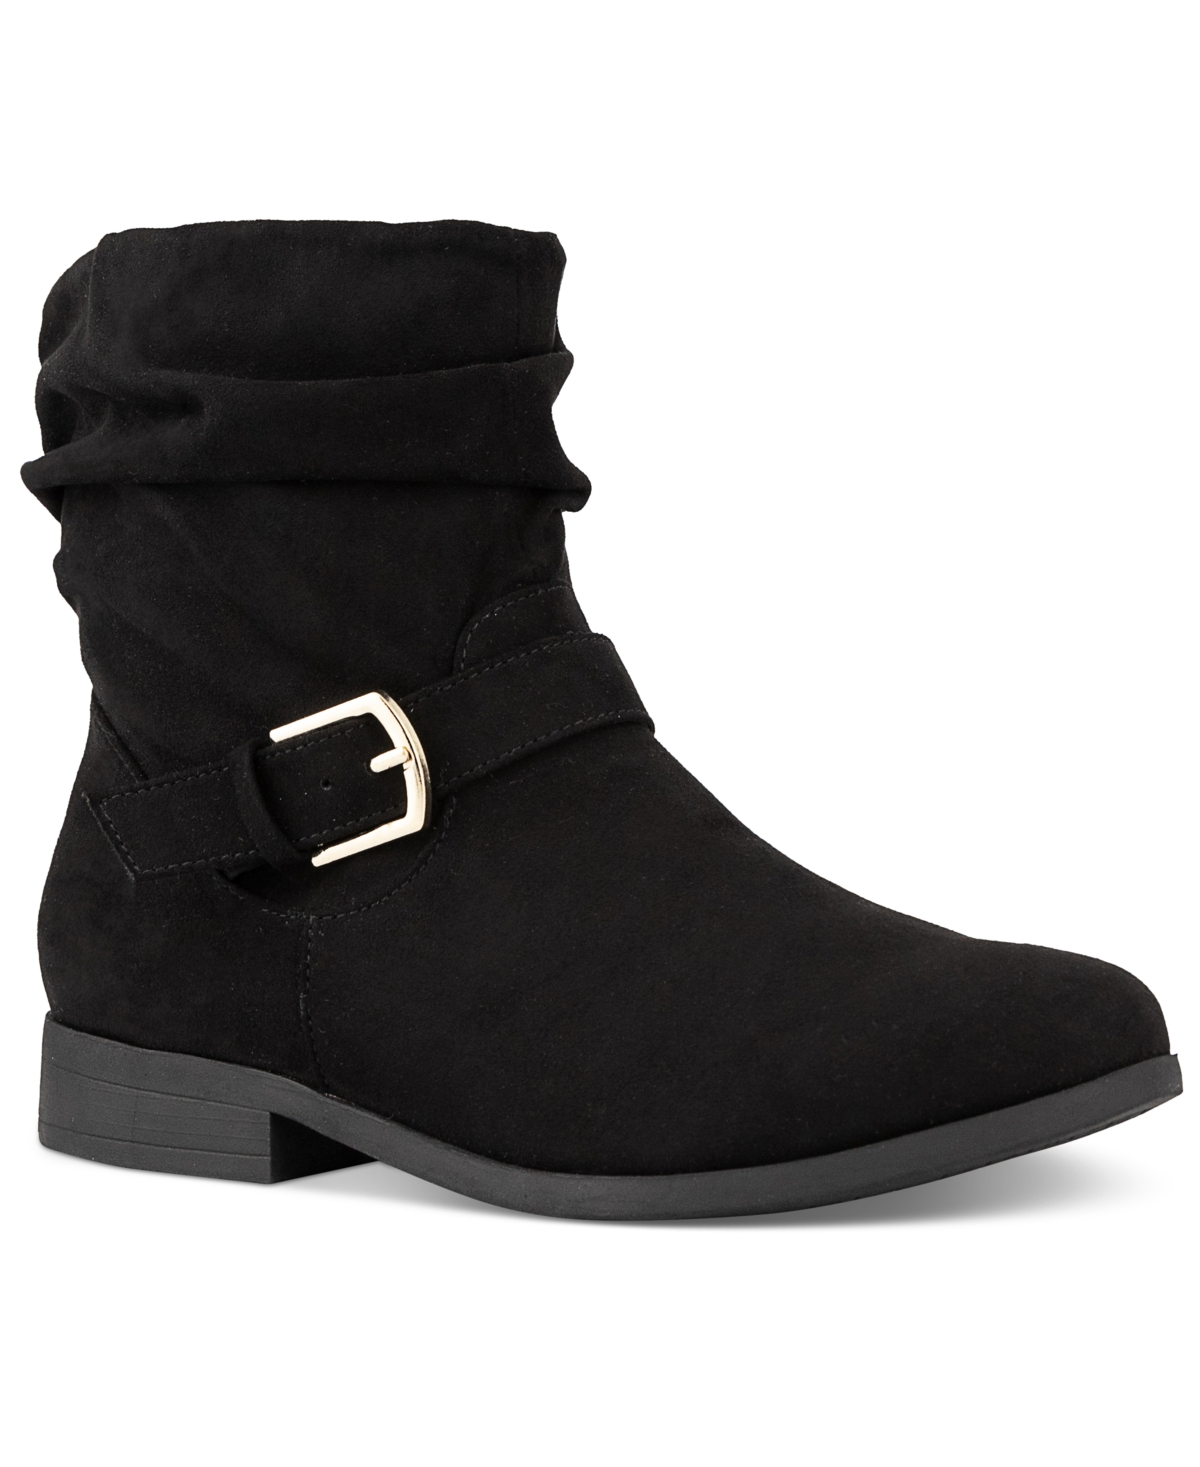 Clarett Slouch Buckled Booties, Created for Macy's - Black